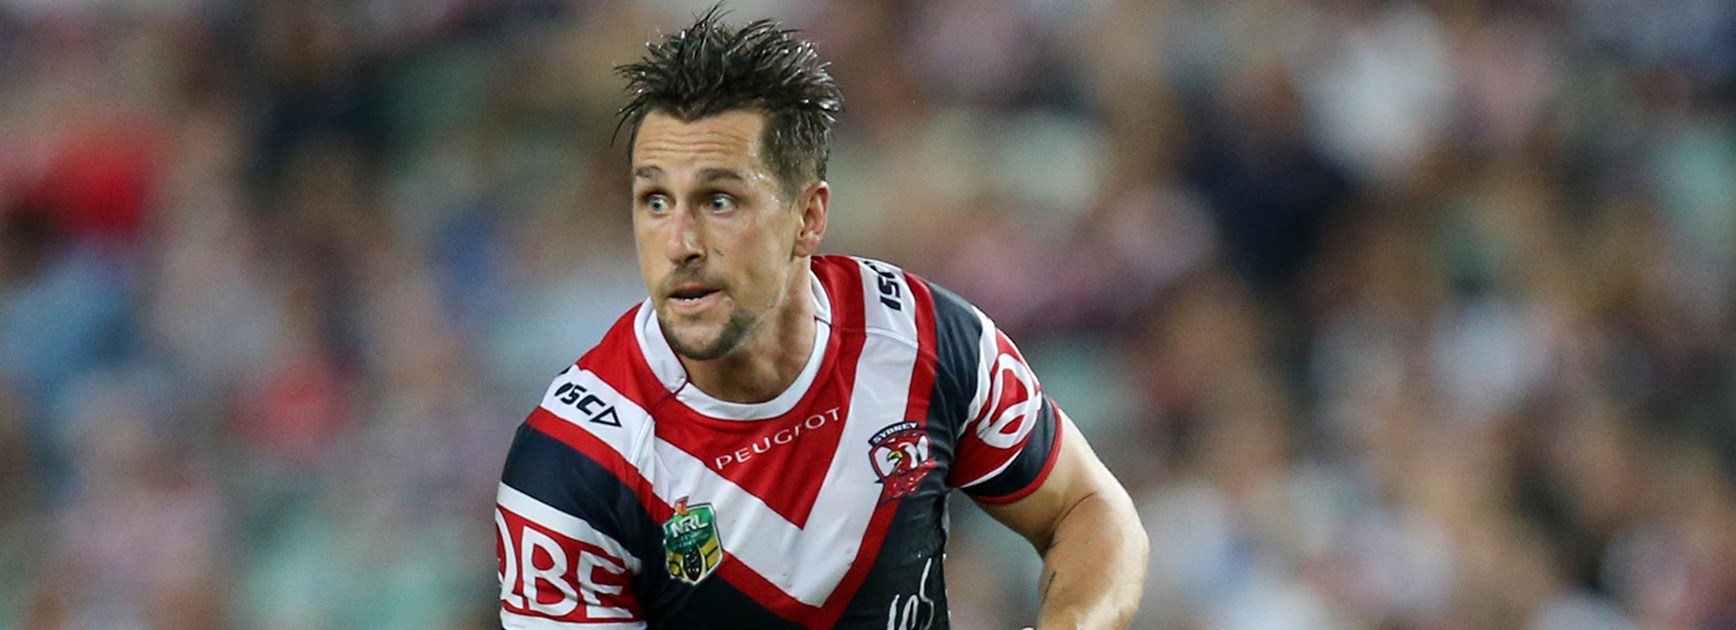 Roosters halfback Mitchell Pearce has started the 2015 NRL Telstra Premiership season in fine form.